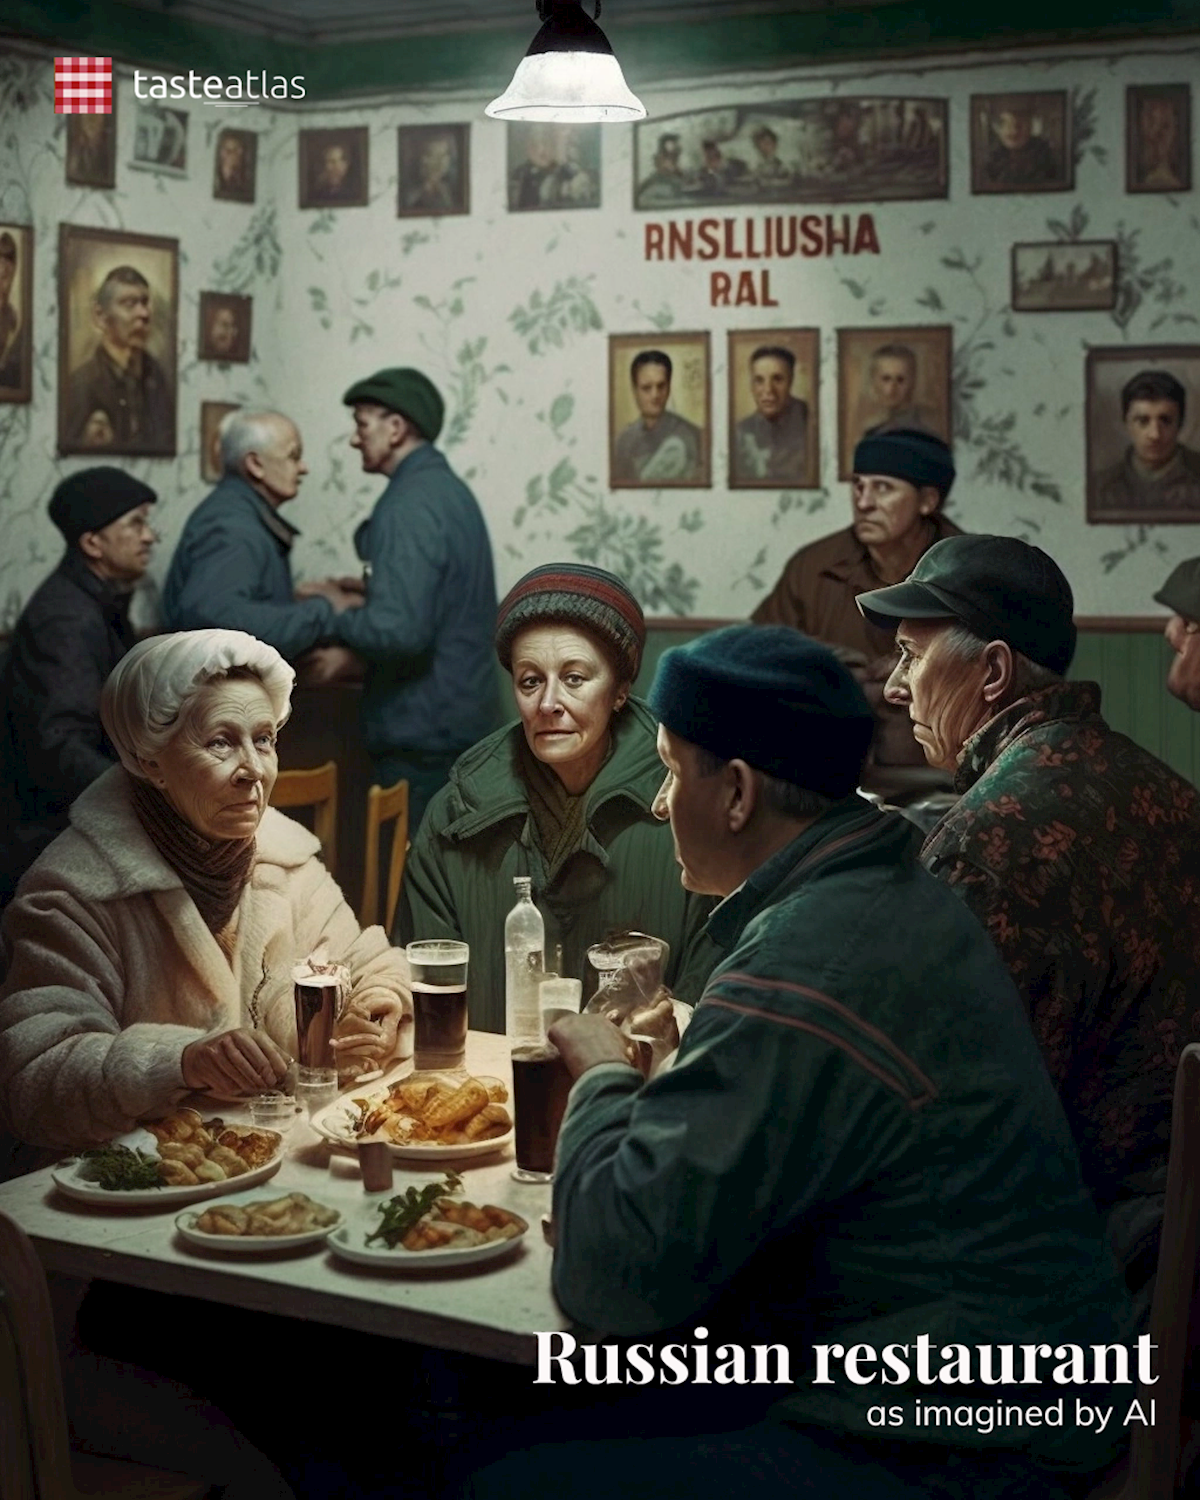 Prompt: Imagine locals eating in a traditional Russian restaurant